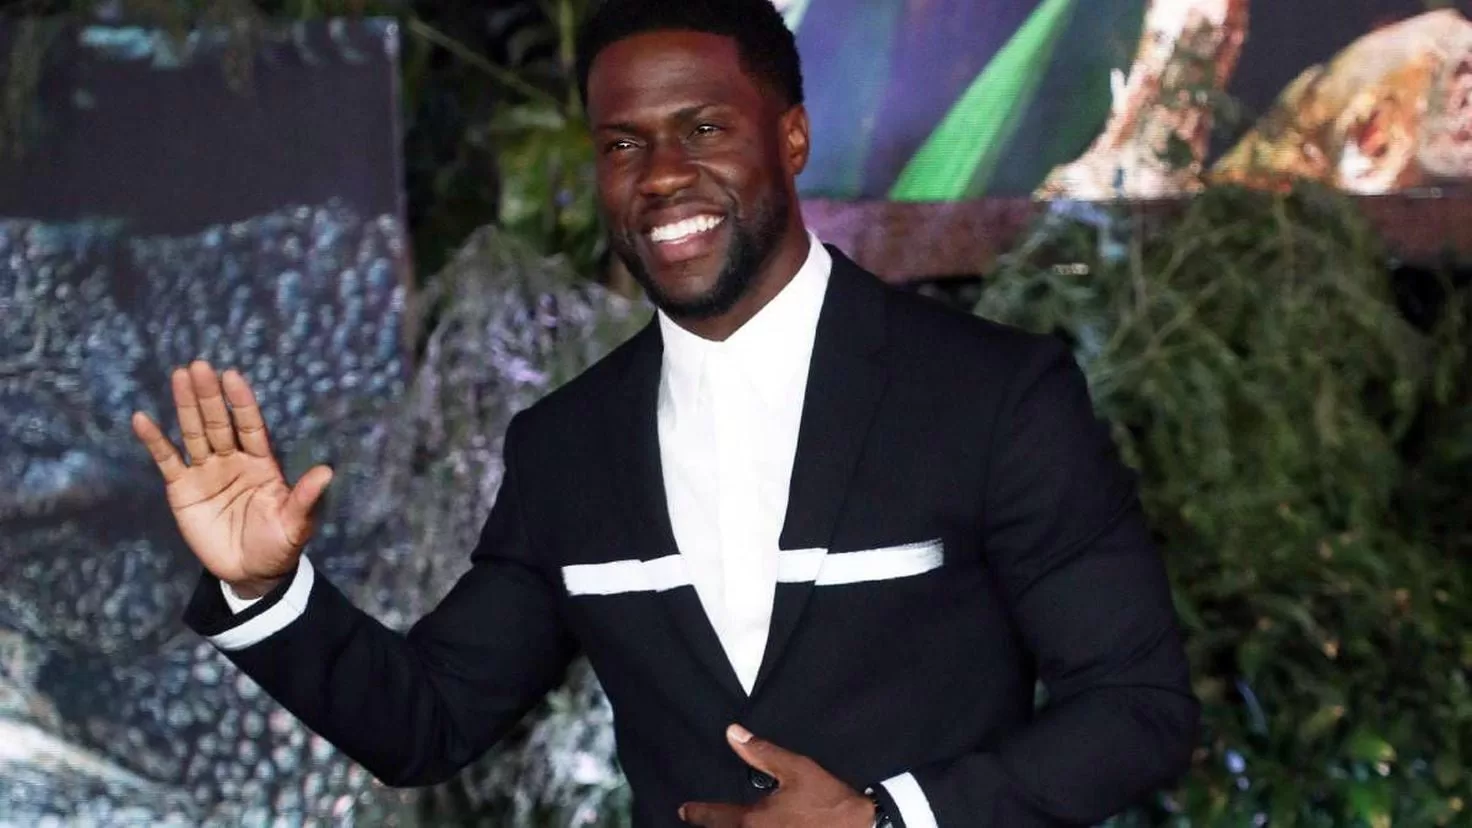 Kevin Hart distances himself from the Oscars: They are not friendly environments for comedy
